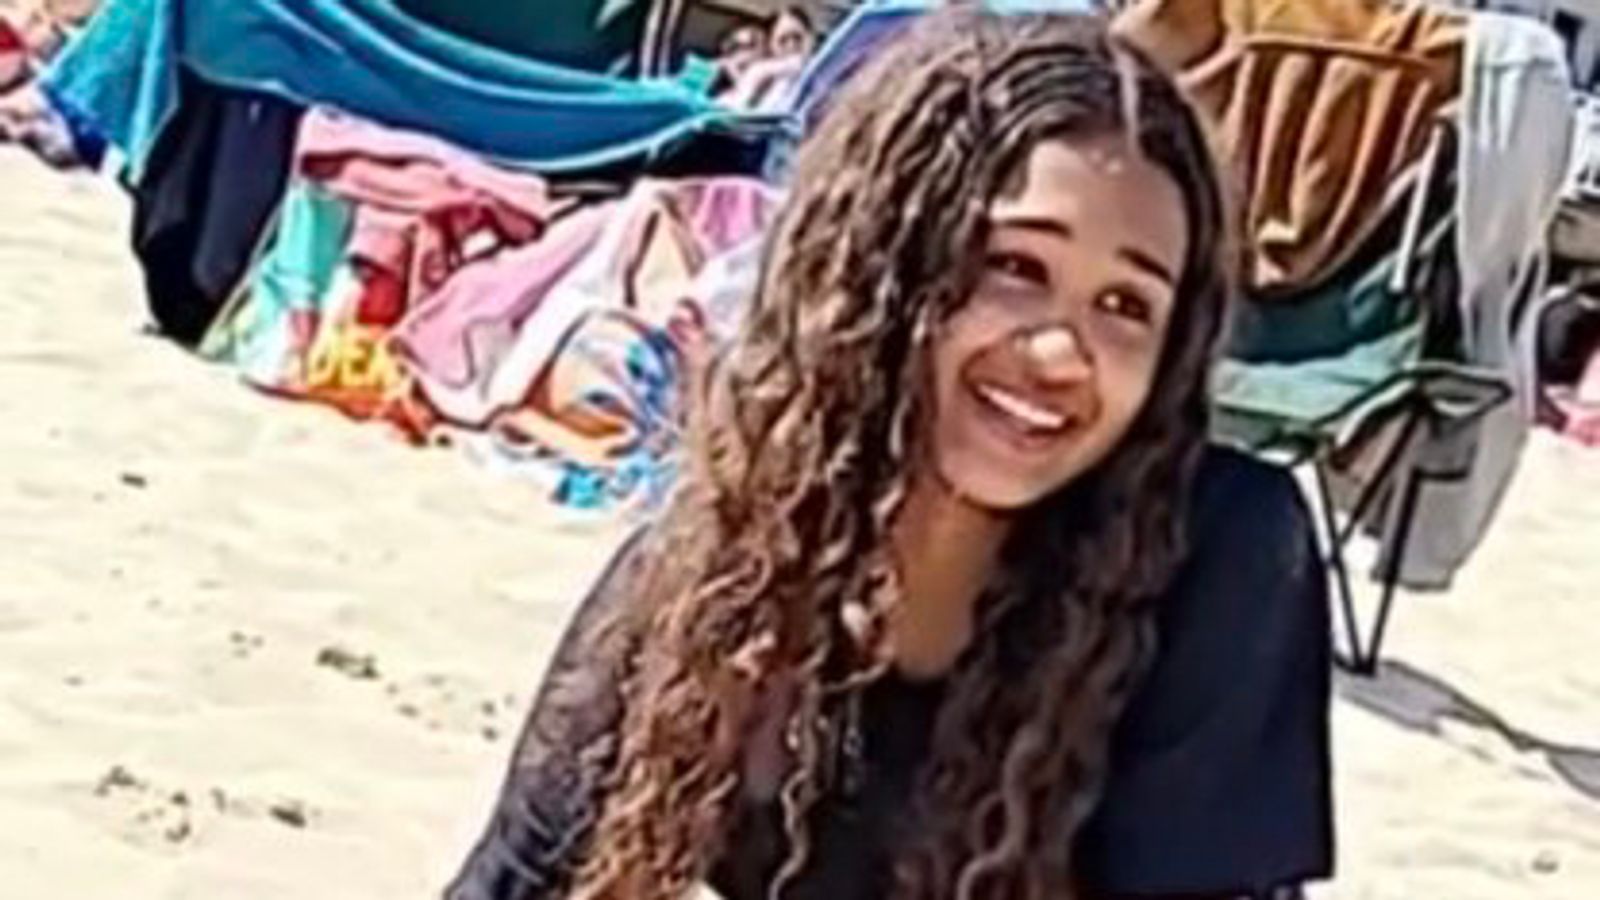 Bournemouth beach deaths: First picture of girl who died in tragedy shared by mother